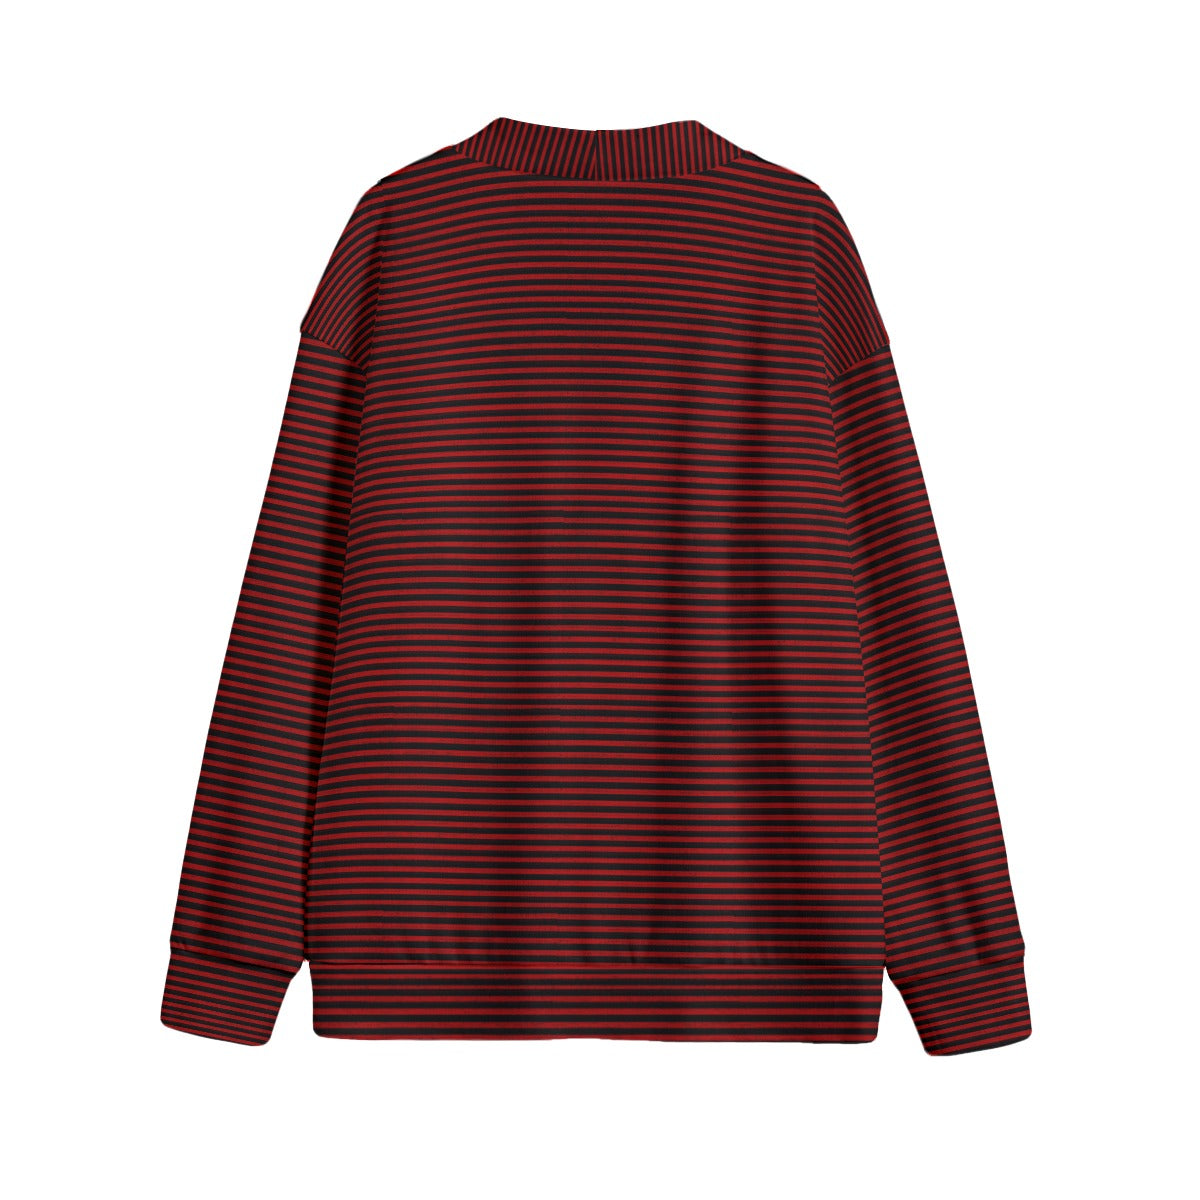 Vampire Art Black and Red Breton Stripes Unisex V-neck Knitted Fleece Cardigan With Button Closure